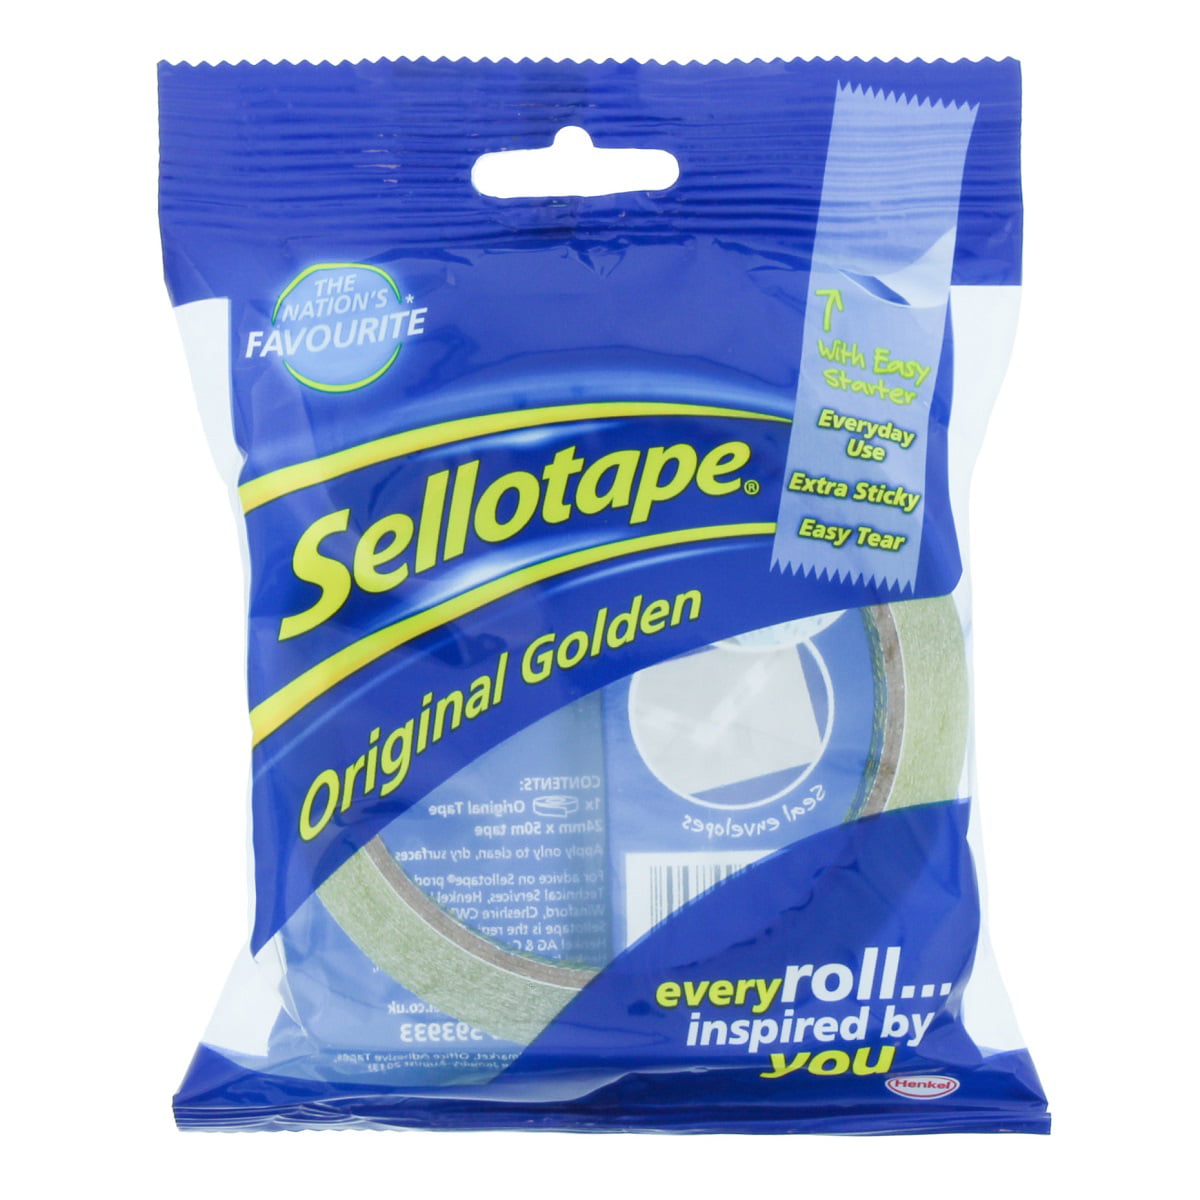 2x Sellotape Original Golden Sticky Tape Strong and extra sticky adhesive tape 